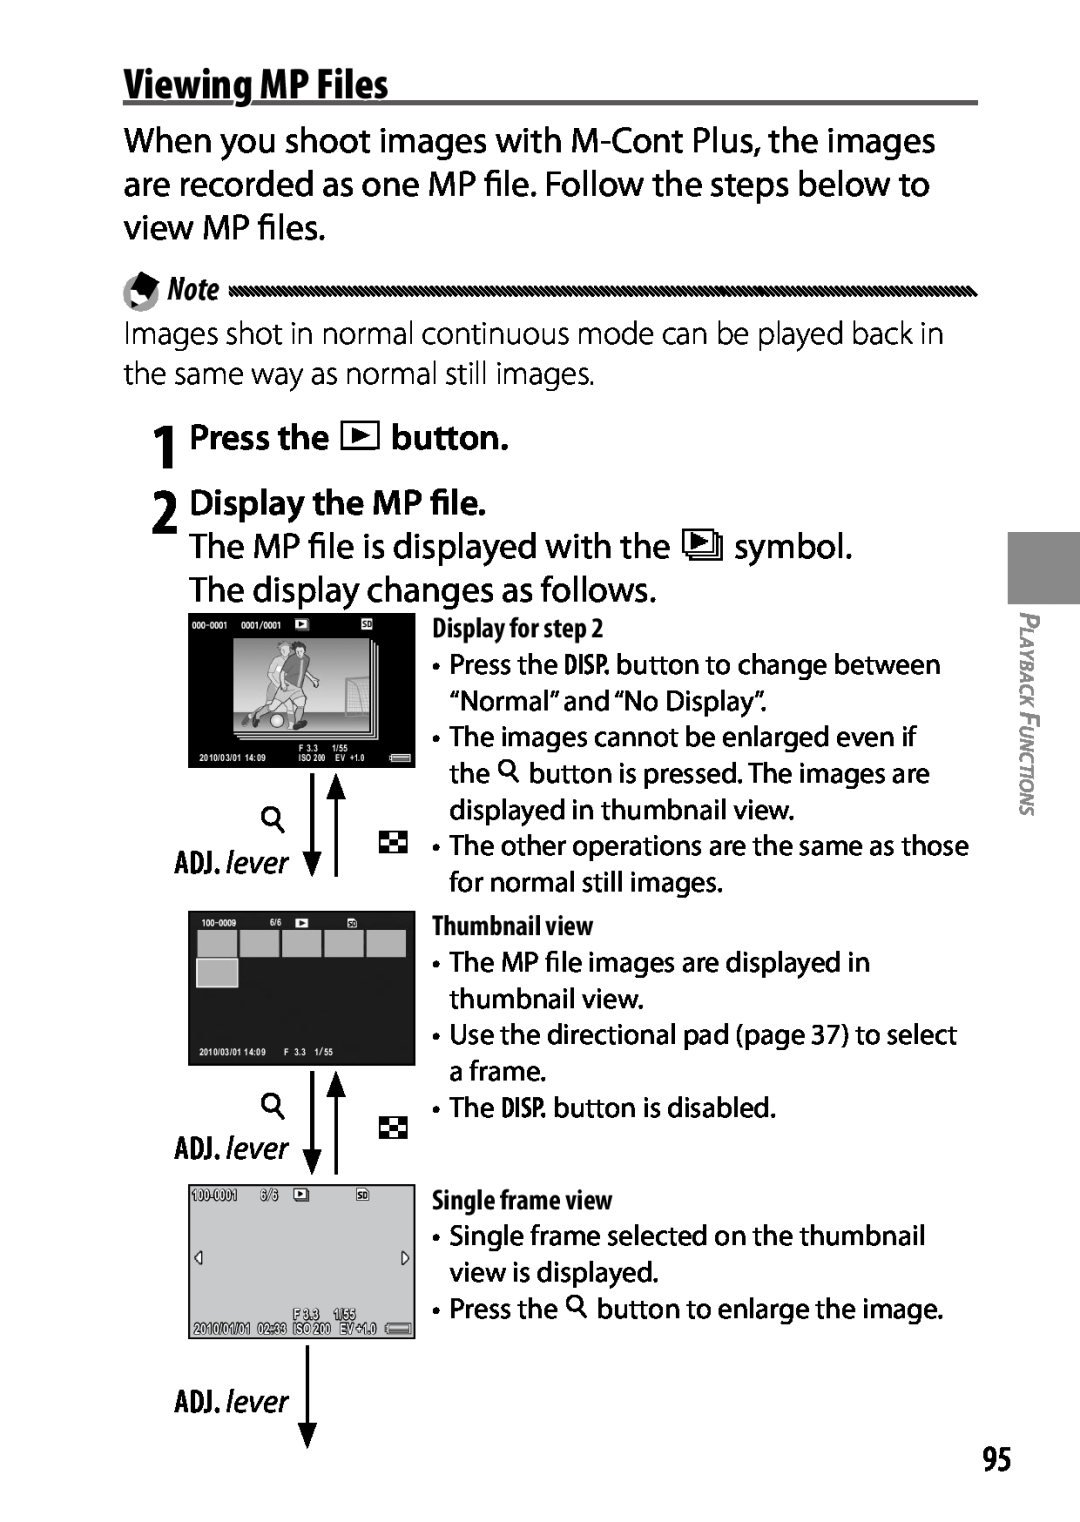 Ricoh 170553, GXR, 170543 manual Viewing MP Files, Display for step, Thumbnail view, Single frame view 